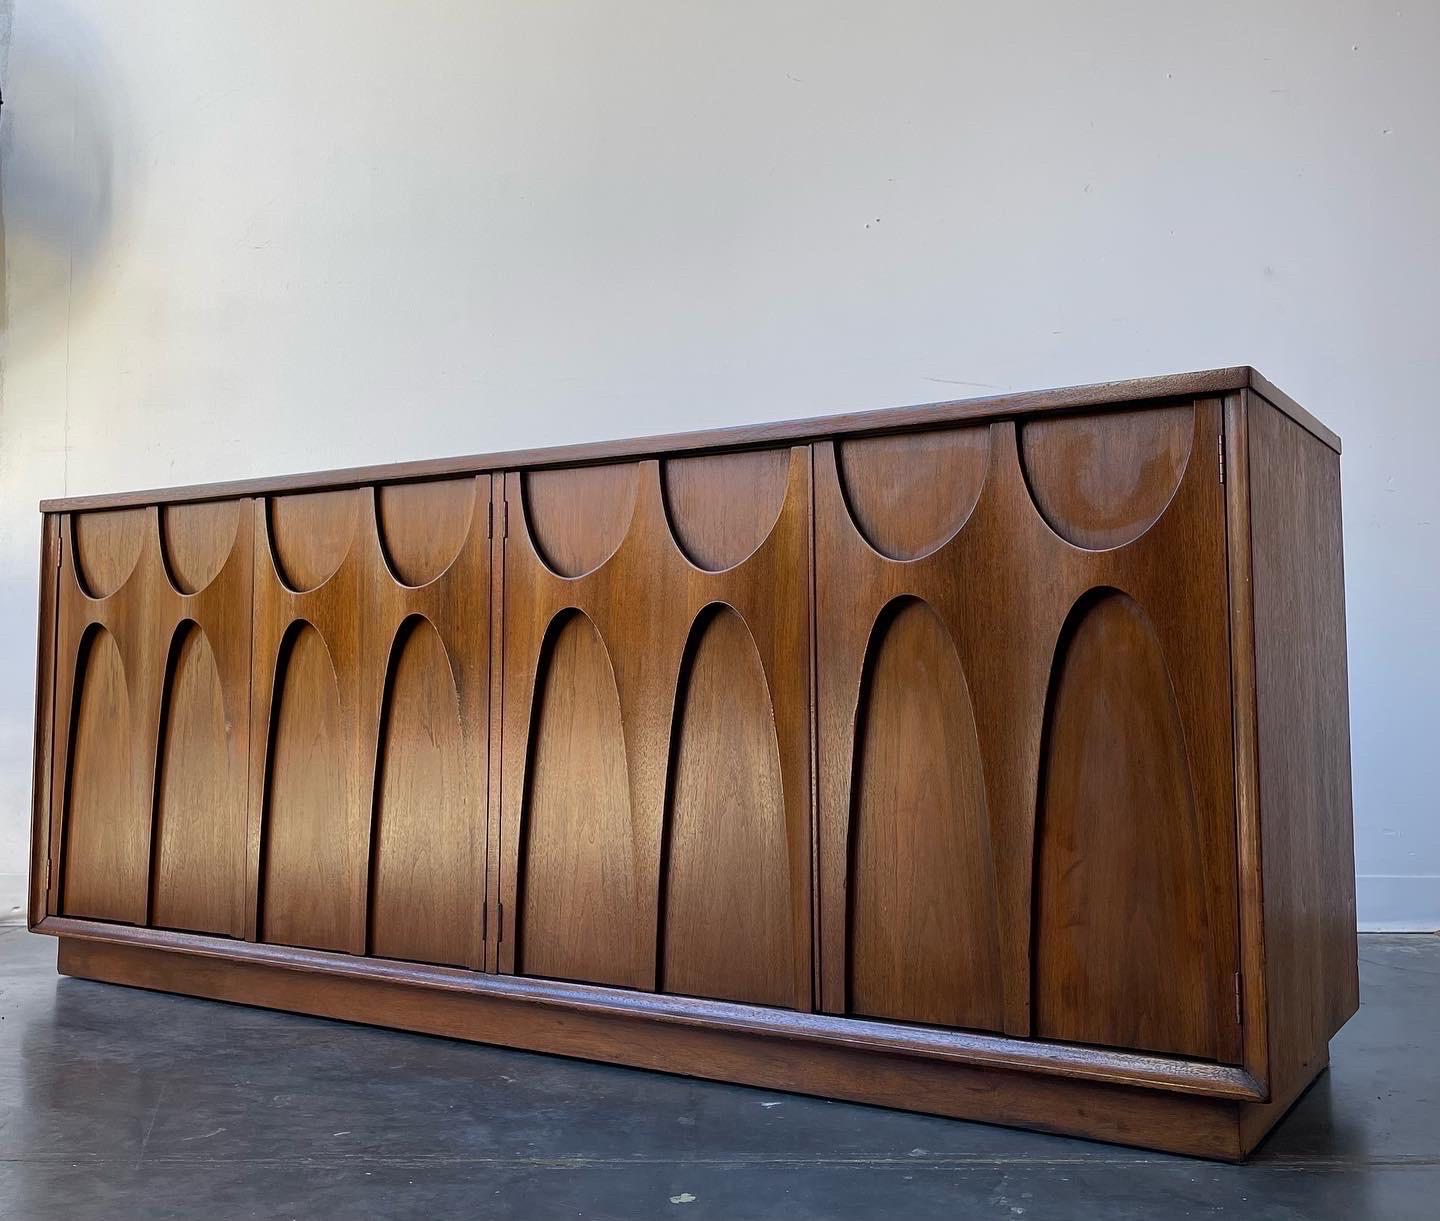 Broyhill Brasilia long credenza

Gorgeous walnut piece designed by Oscar Niemeyer for Broyhill.

Recently refinished and in great condition. Three drawers and one open cabinet.

Dimensions: 
72 wide x 19 deep x 29 inches high.